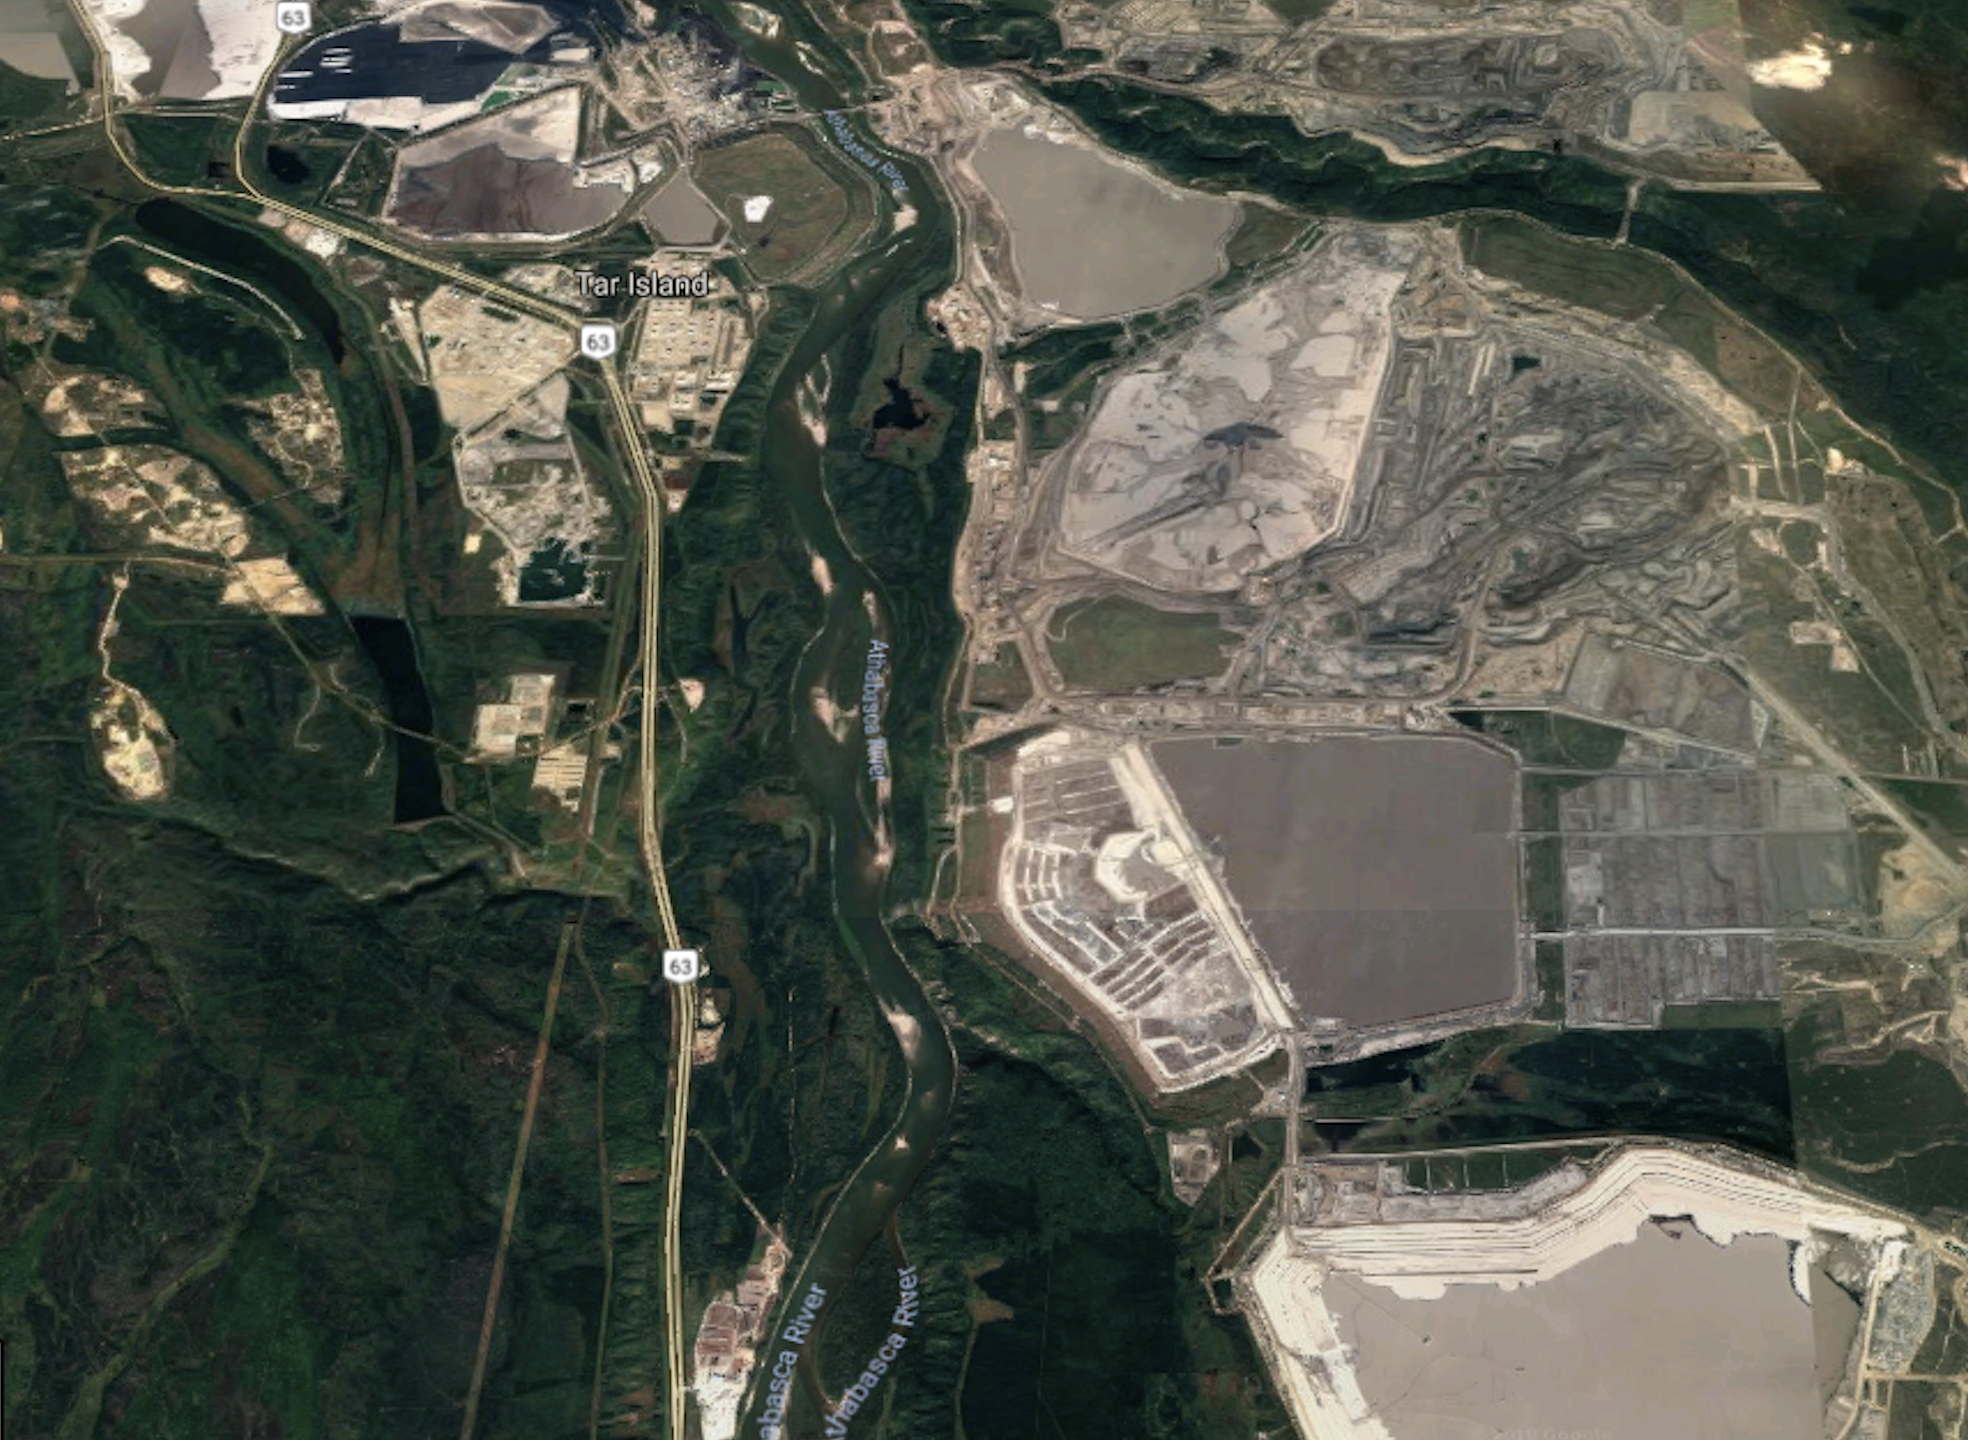 An aerial photo shows a vast oilsands facility carved out of the forest, including huge tailing ponds for mining waste.